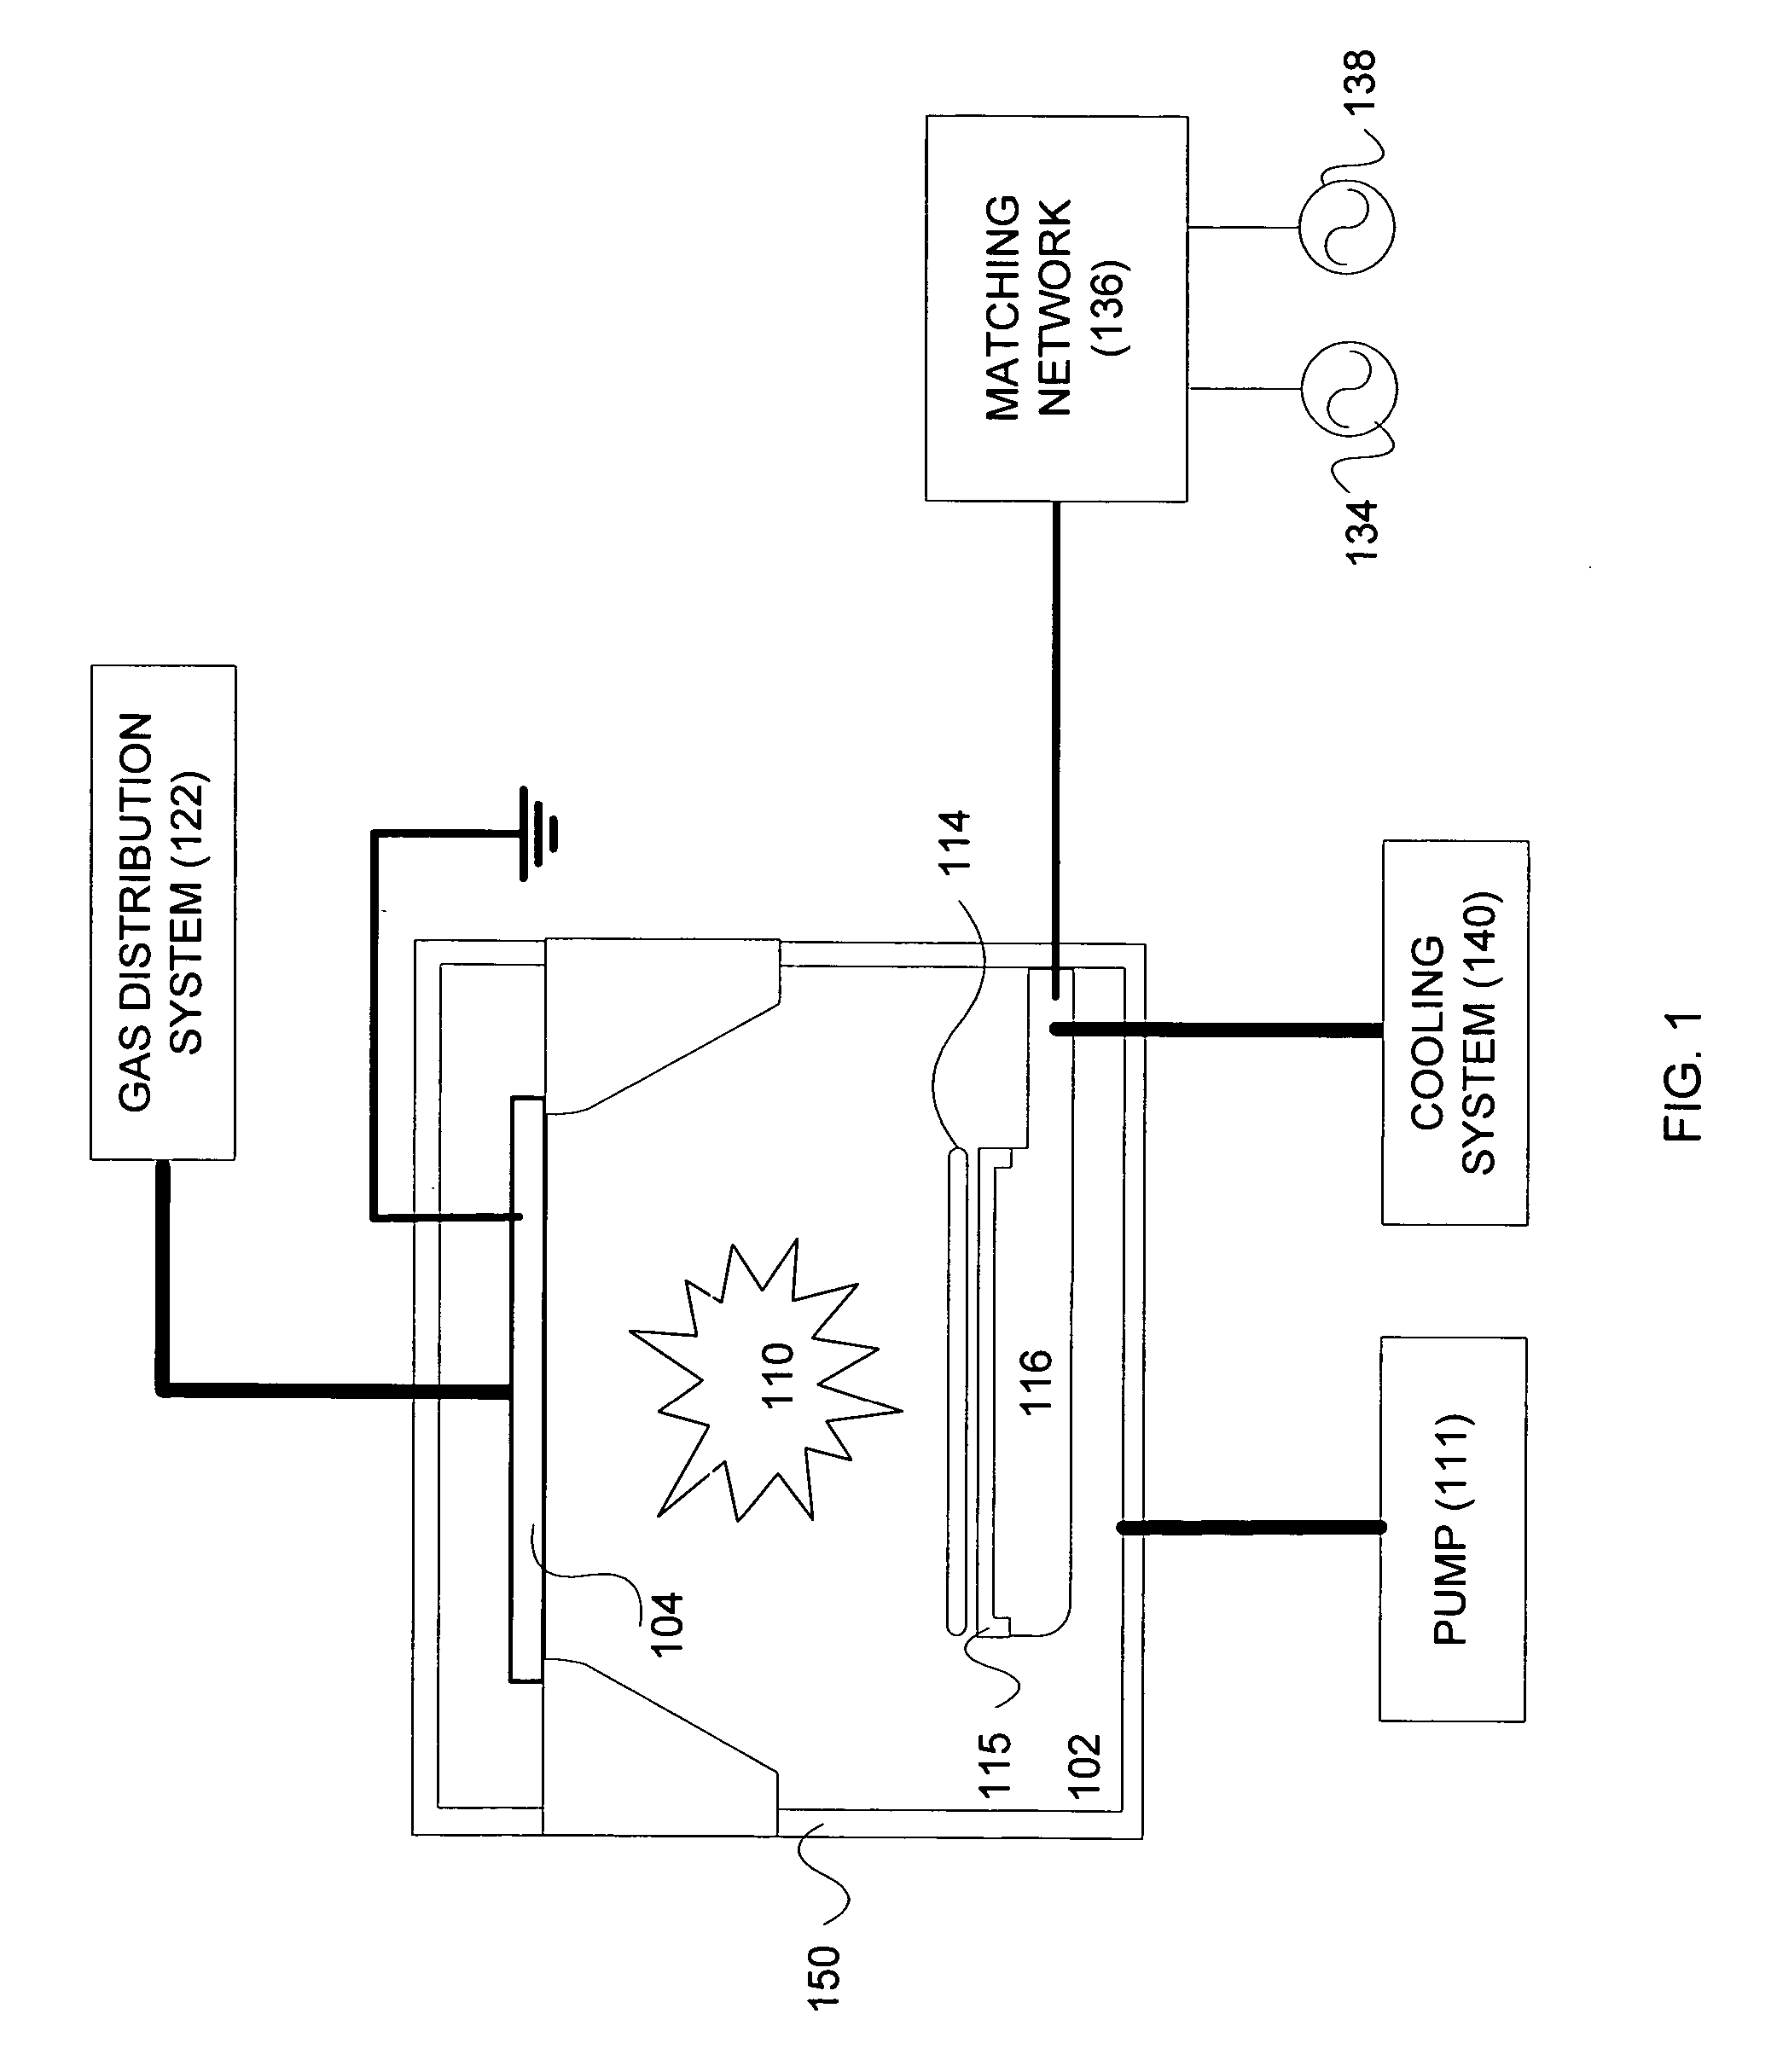 Methods and apparatus for monitoring a process in a plasma processing system by measuring self-bias voltage